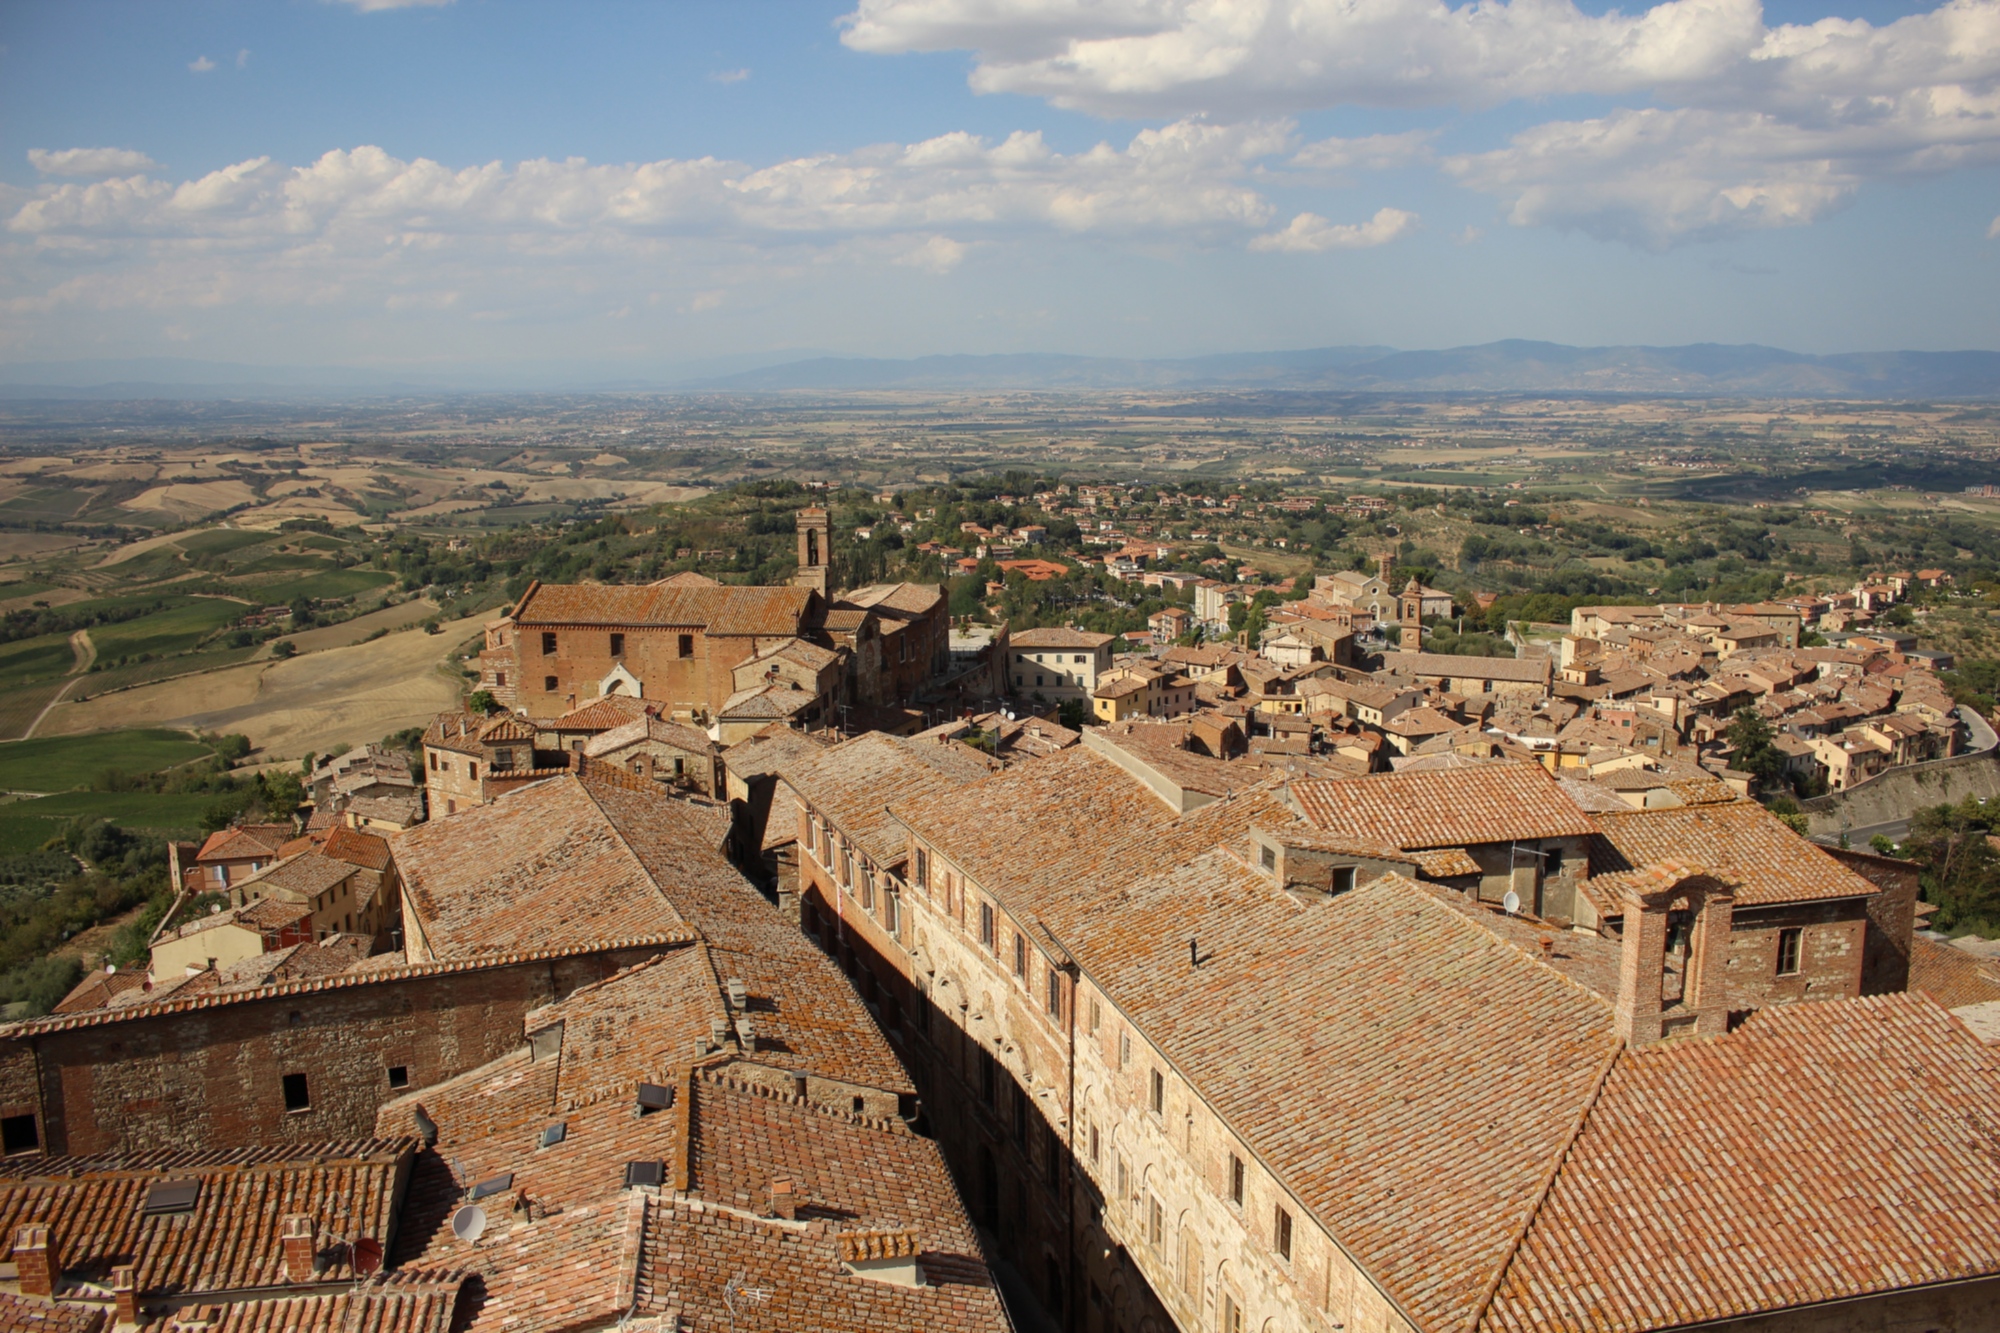 view-from-palazzo-comunale-tower-montepulciano-II